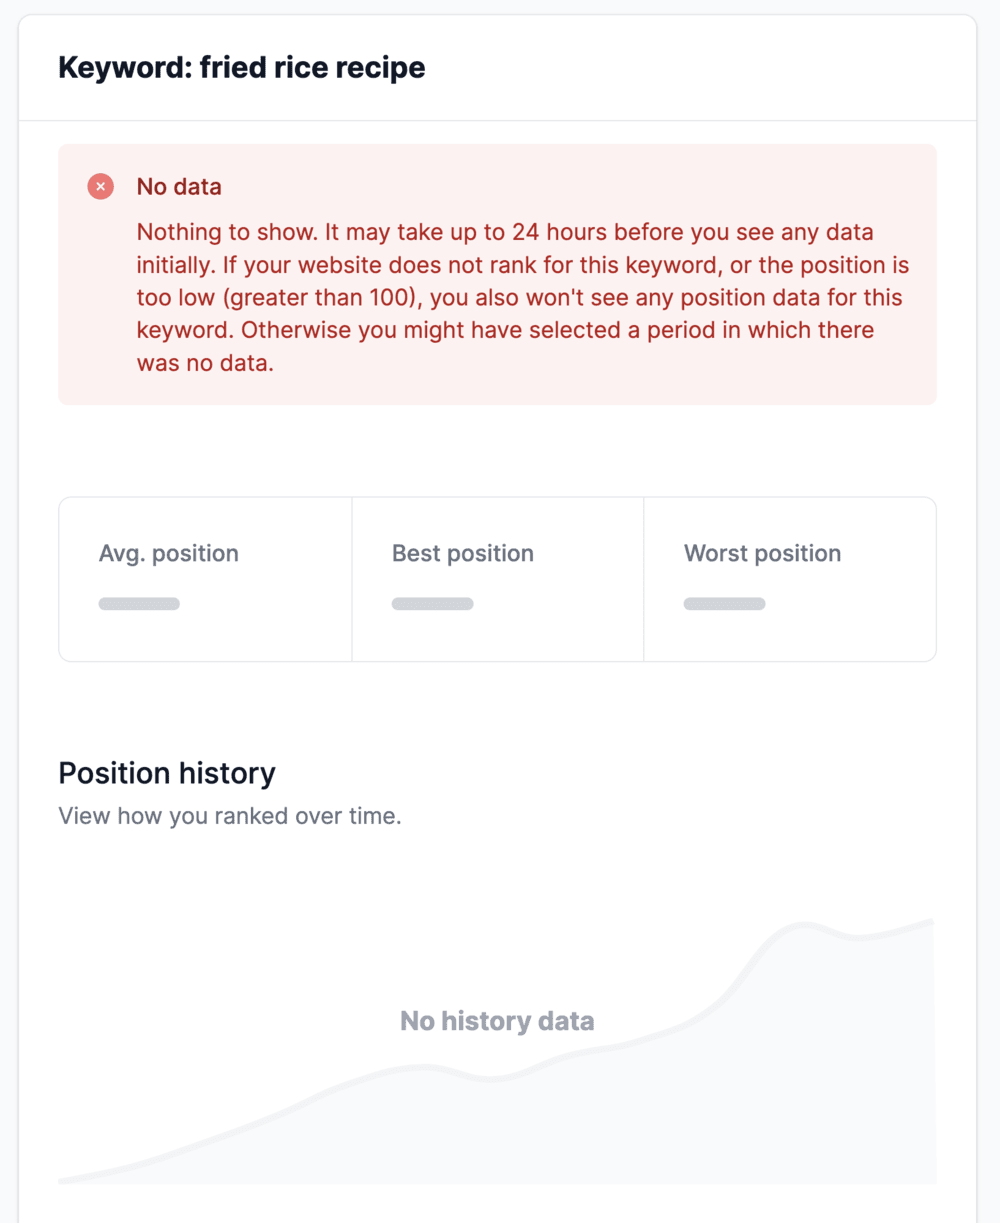 No position data available